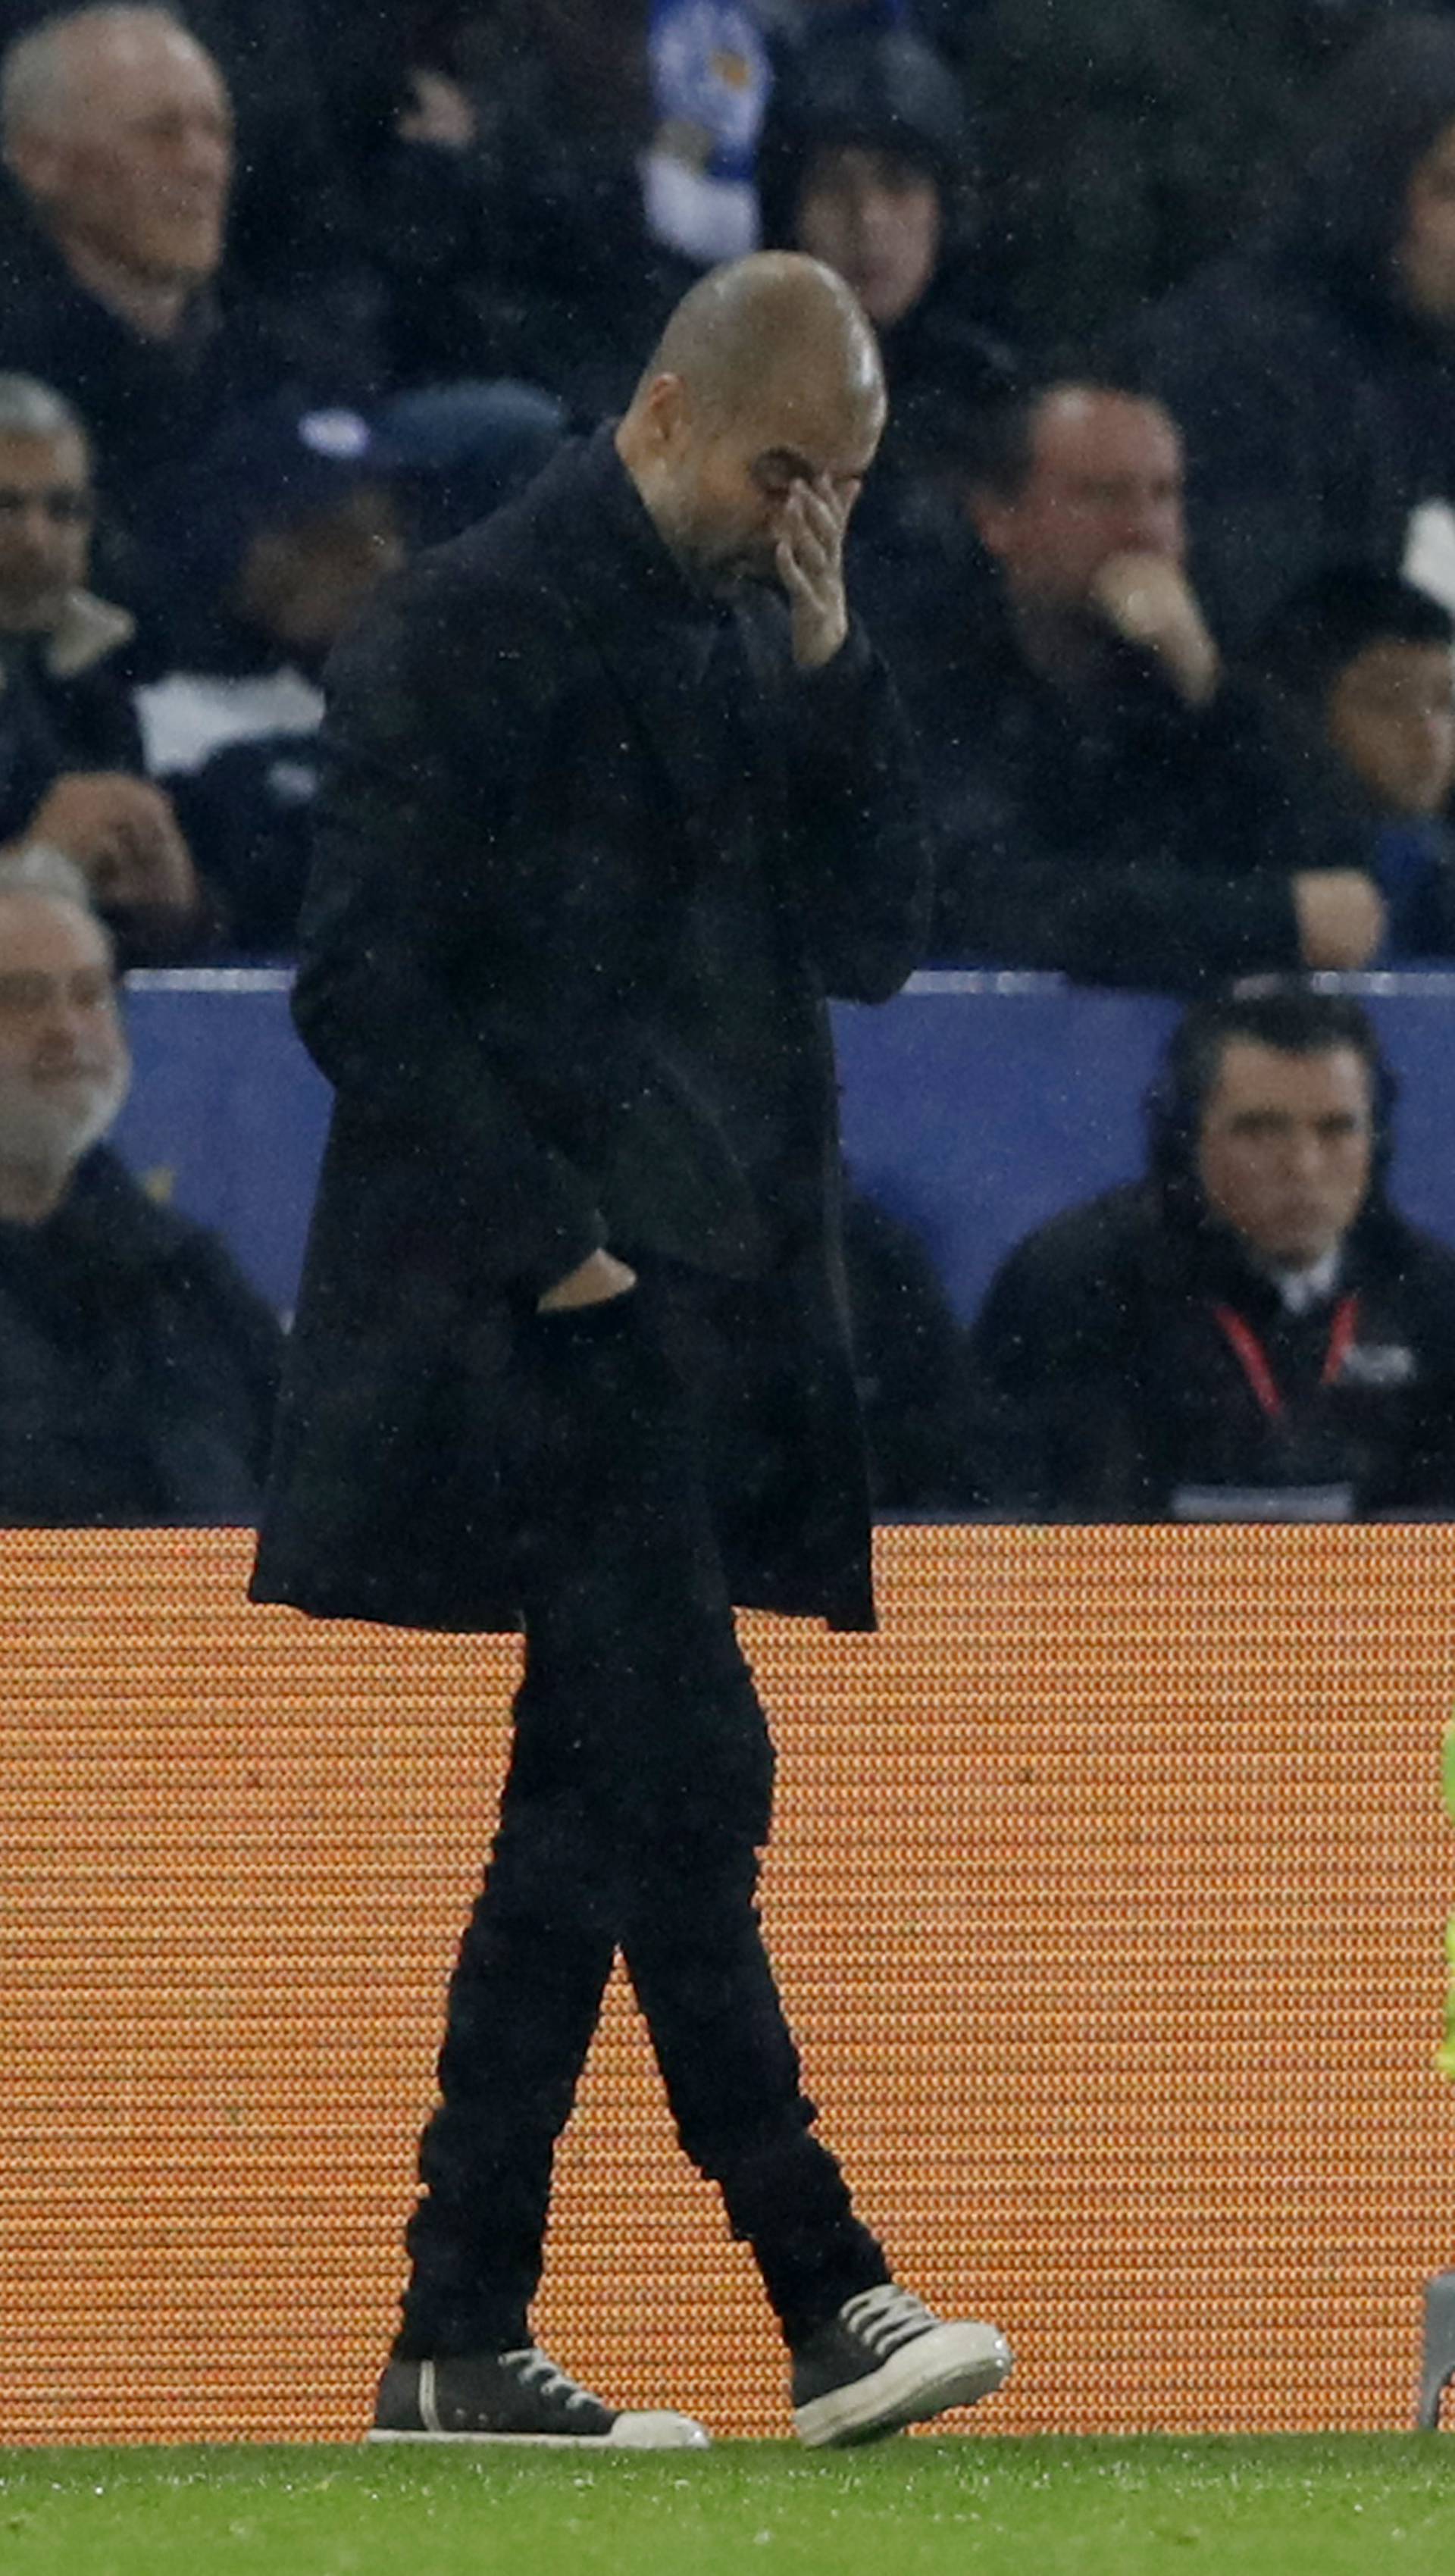 Manchester City manager Pep Guardiola looks dejected